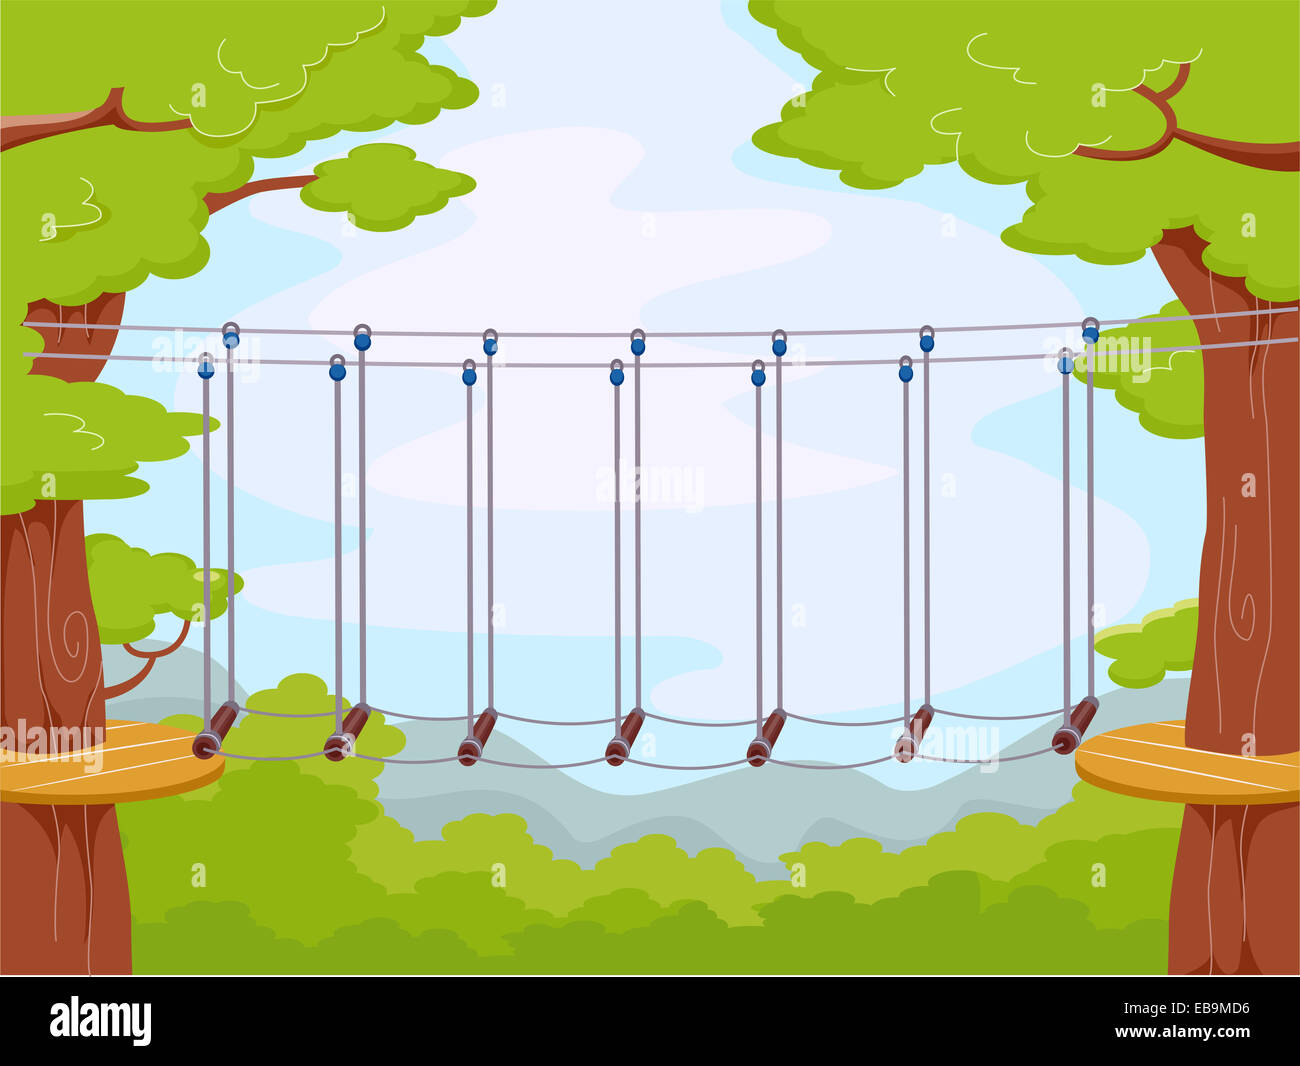 Illustration Featuring an Obstacle Course Stock Photo